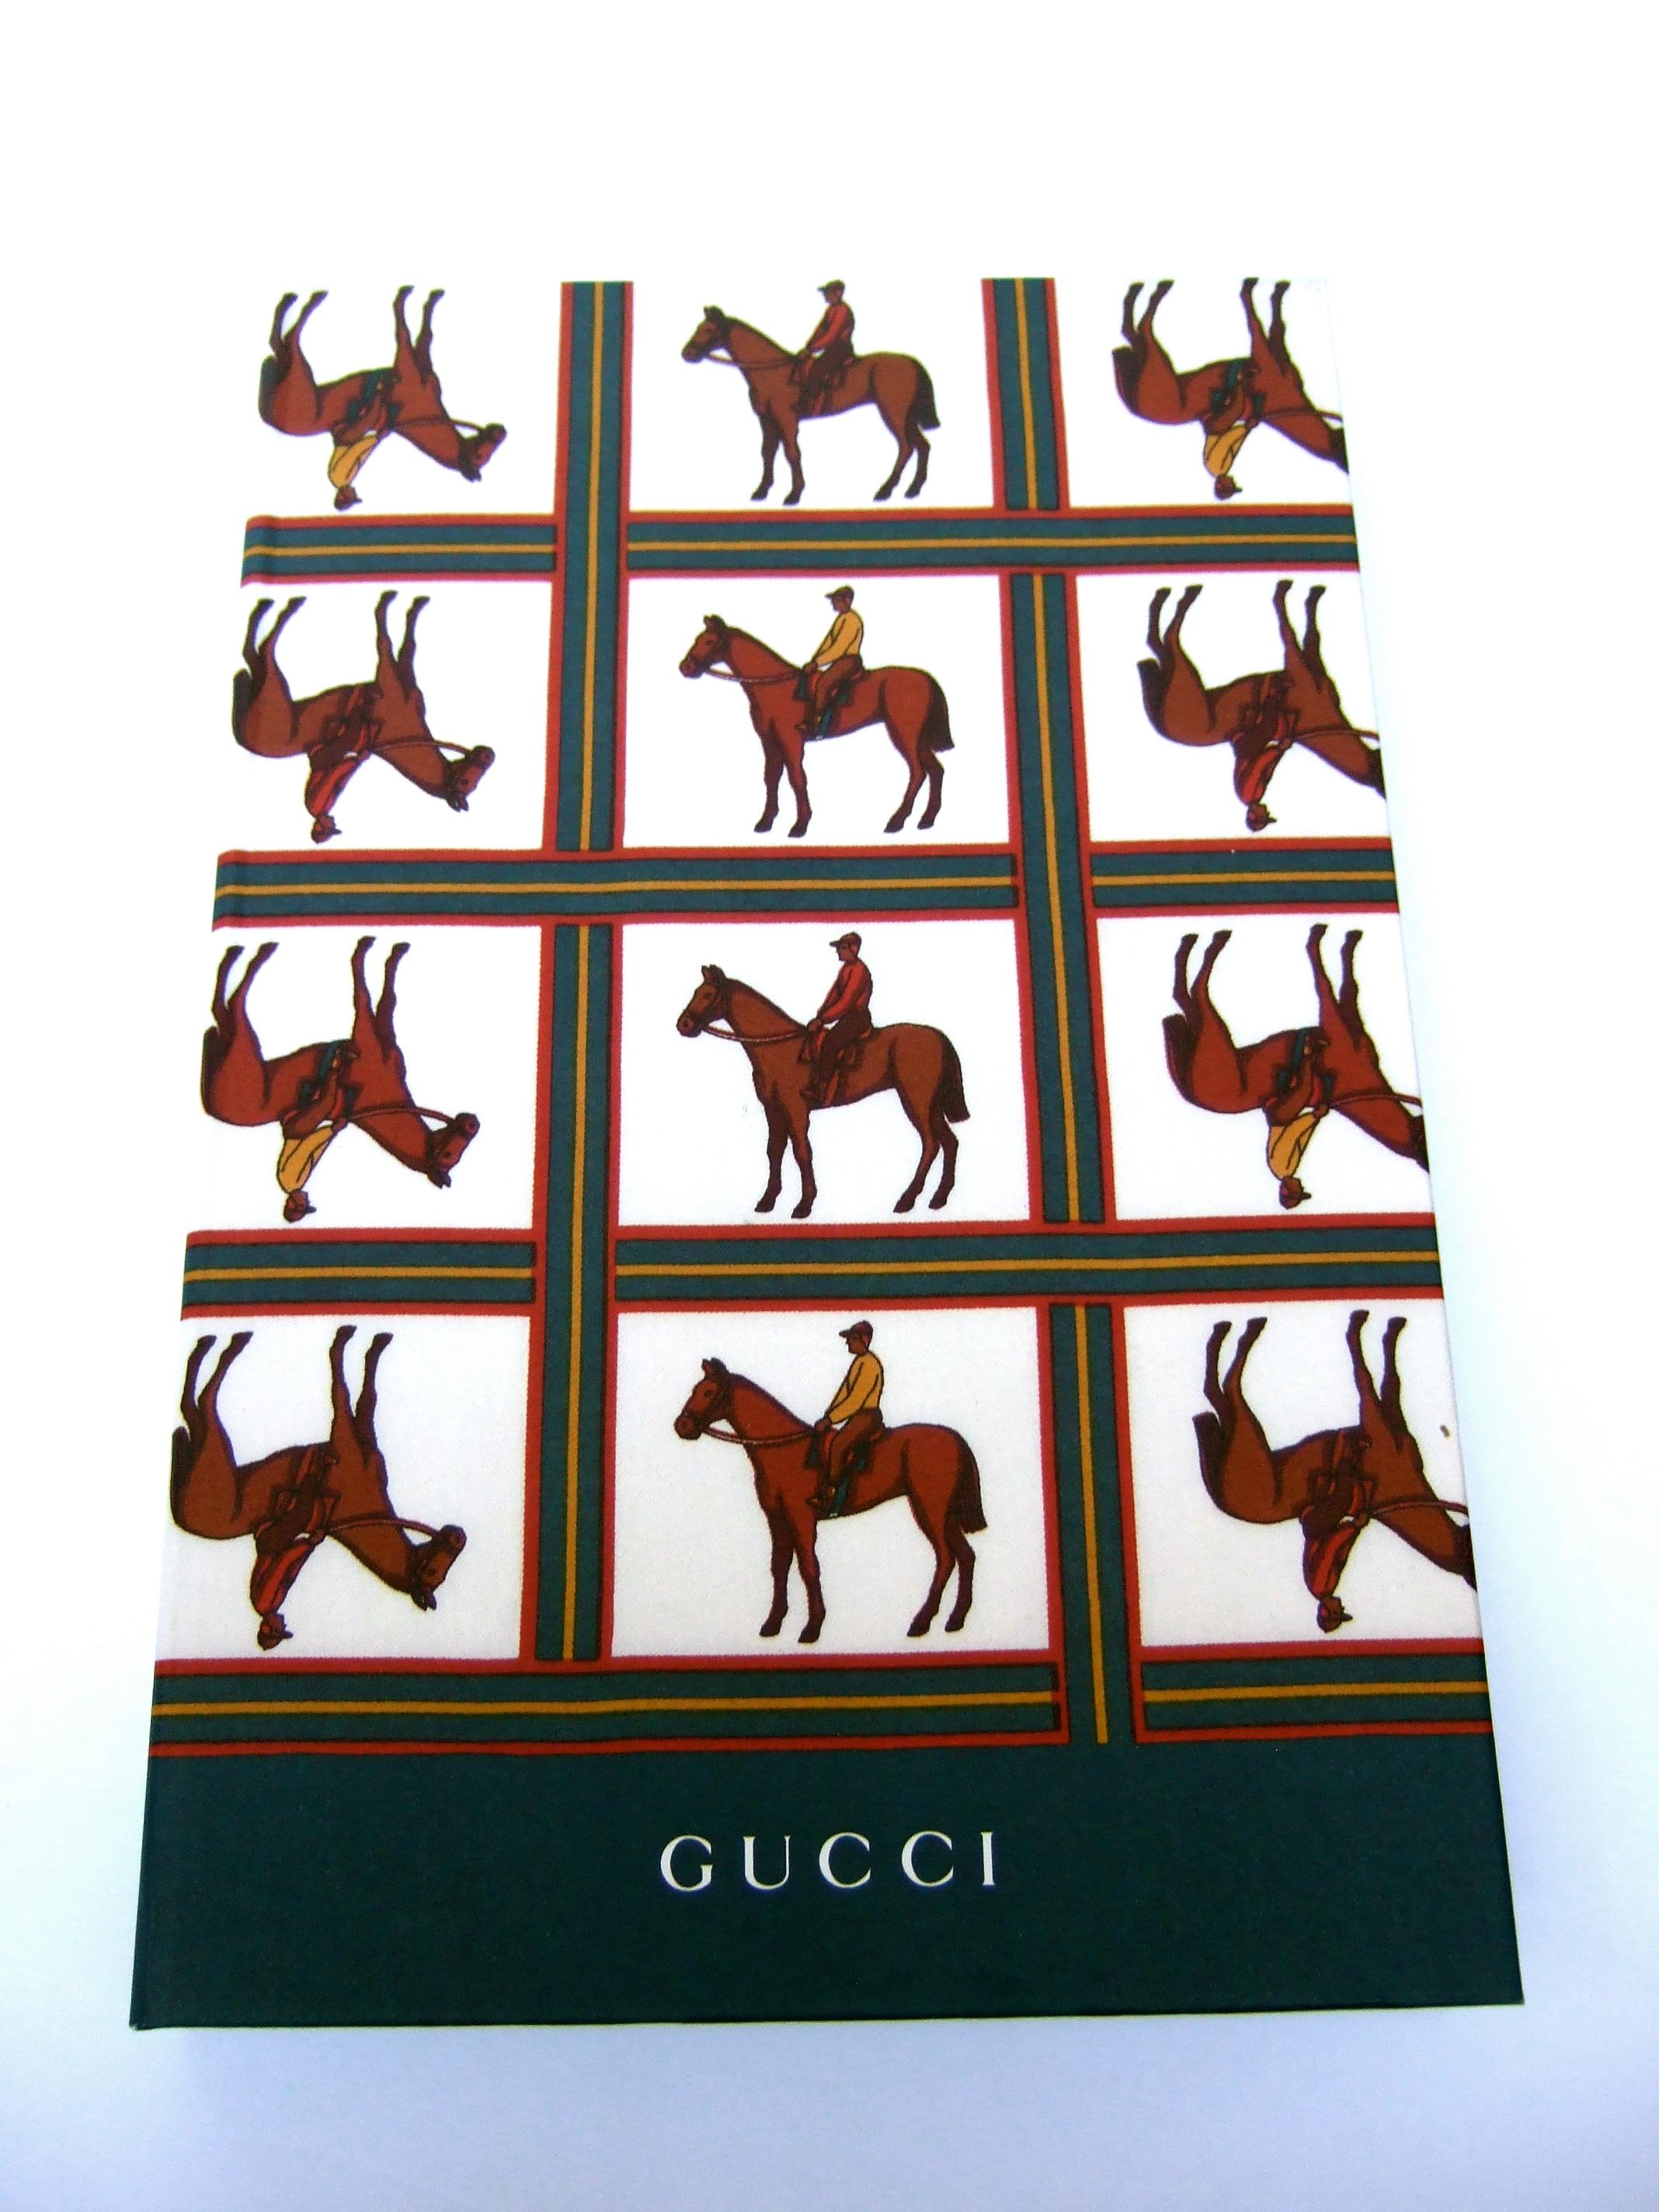 Gucci Equine Design Note Cards & Journal Book Stationery Set in Gucci Box c 1990 For Sale 1